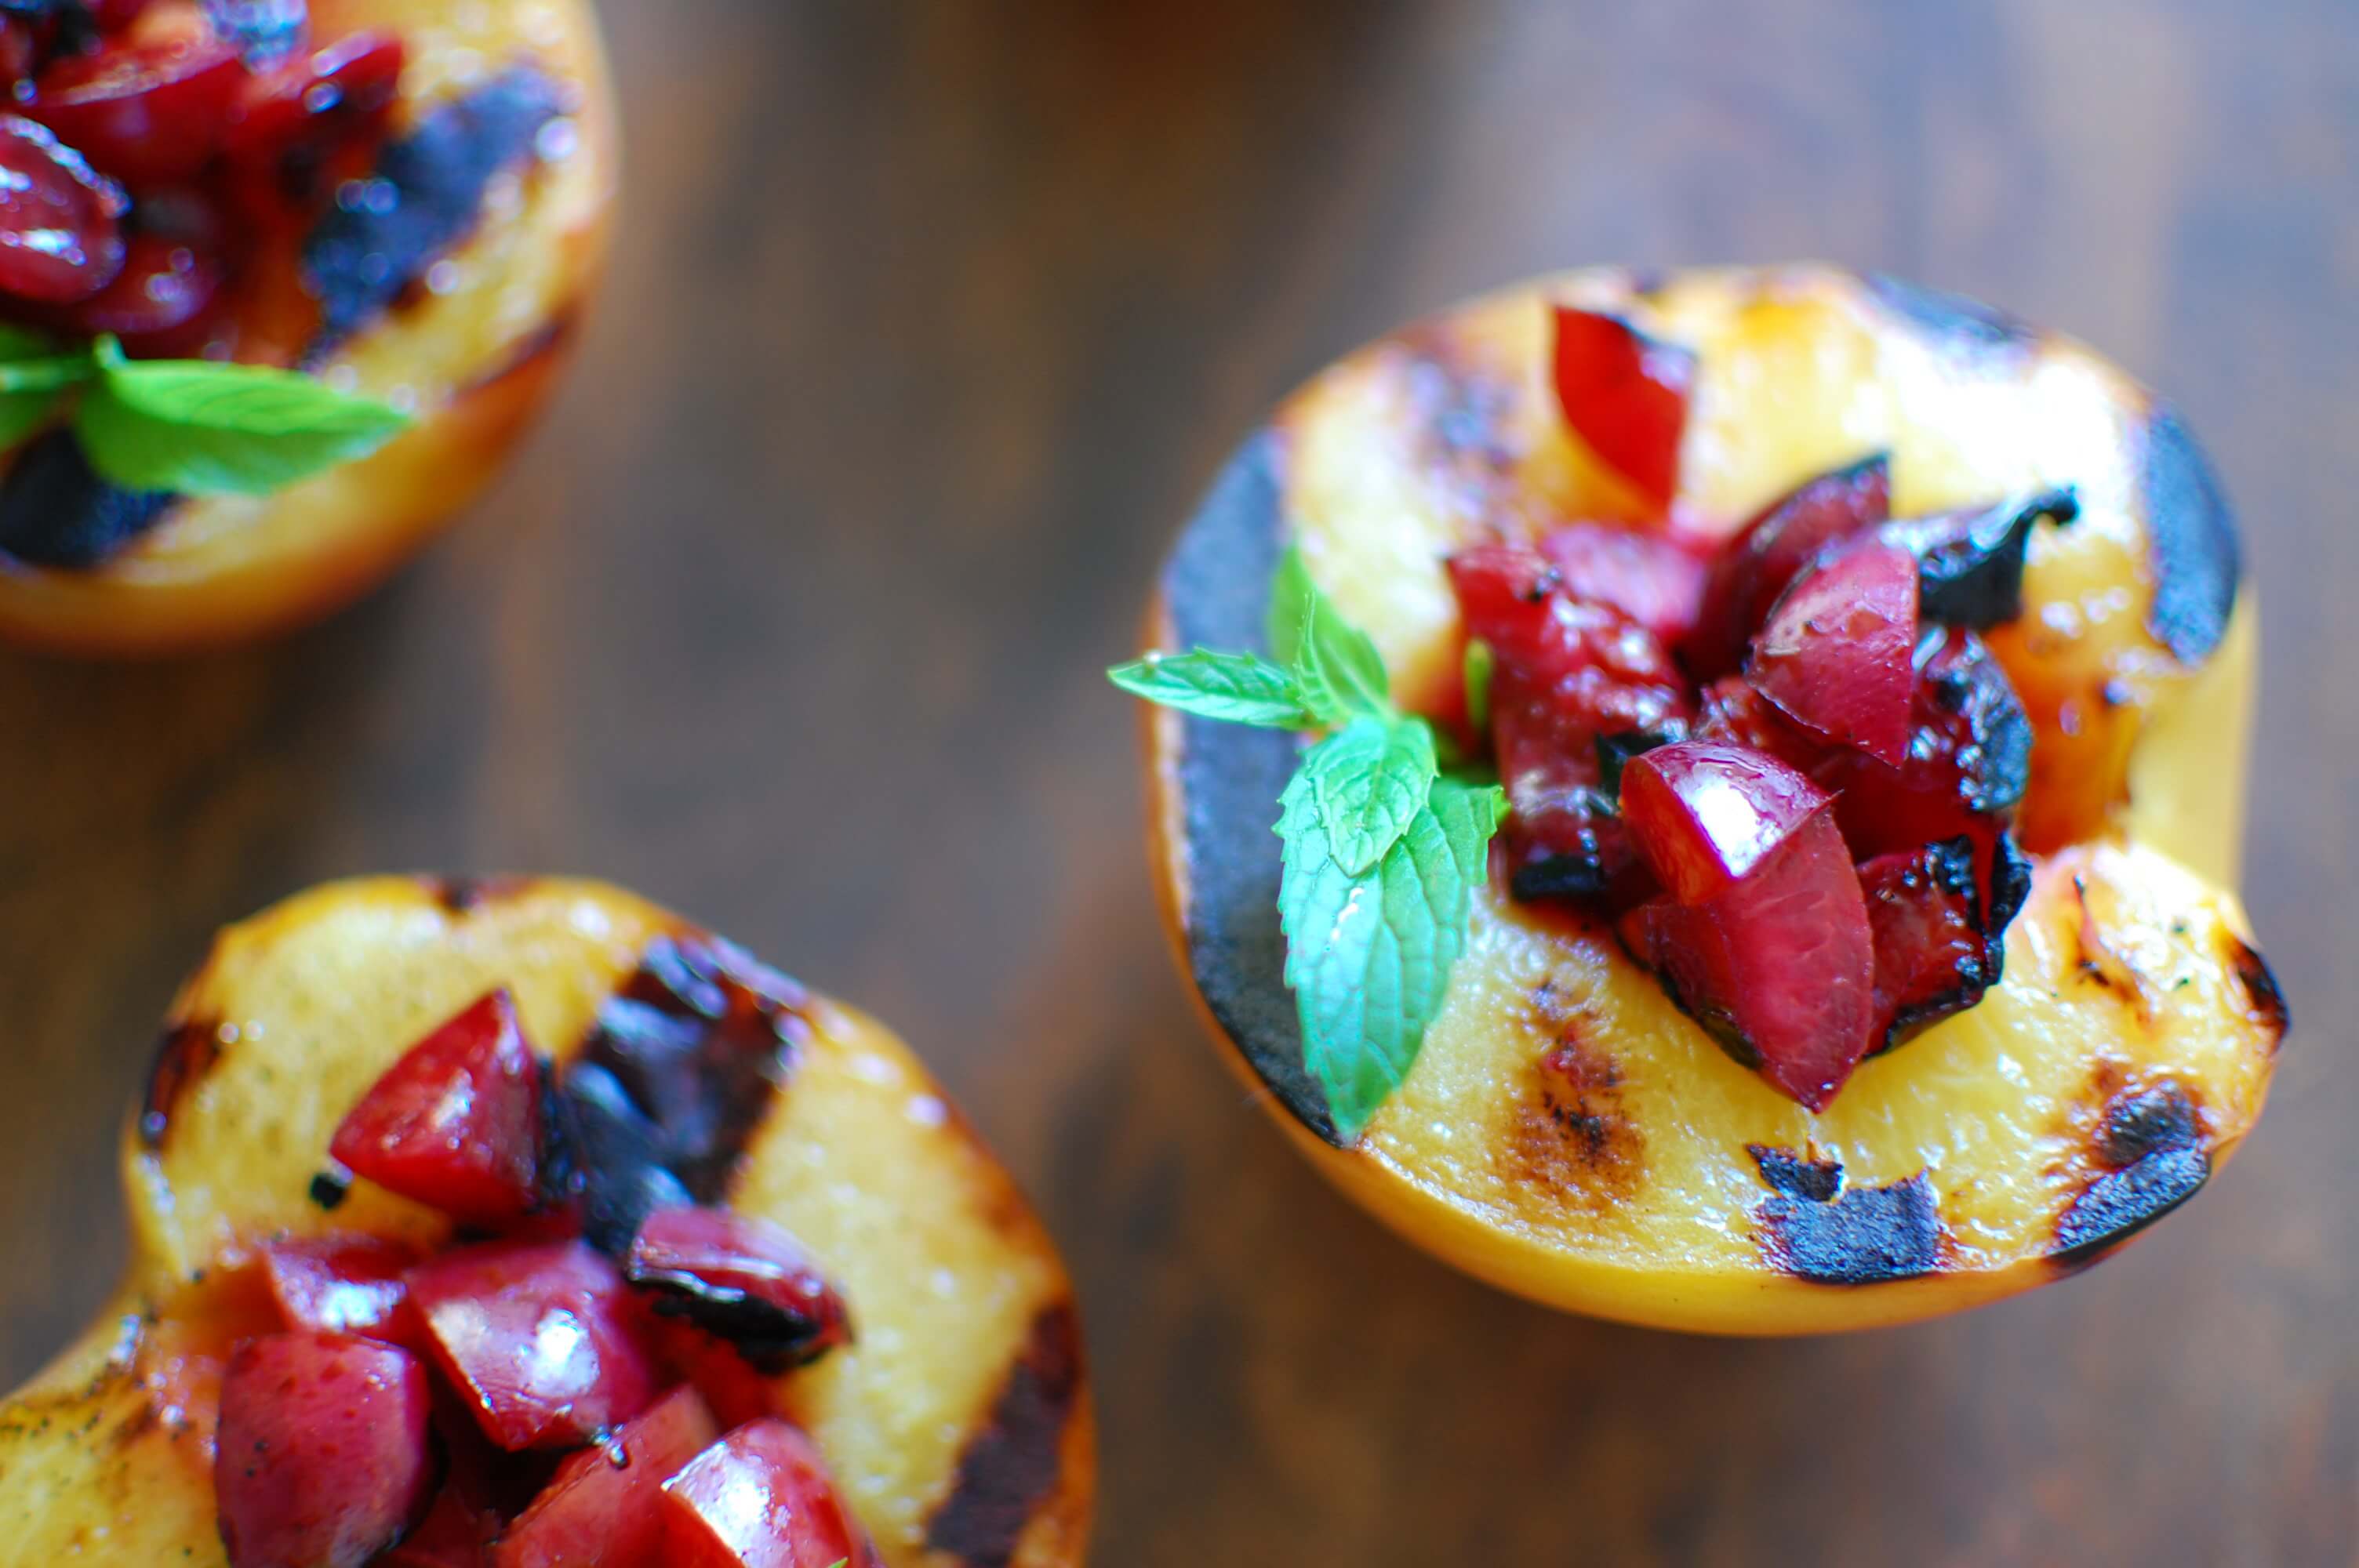 20 Meal Ideas Your Clients Can Grill This Summer: Grilled Cherry Stuffed Peaches